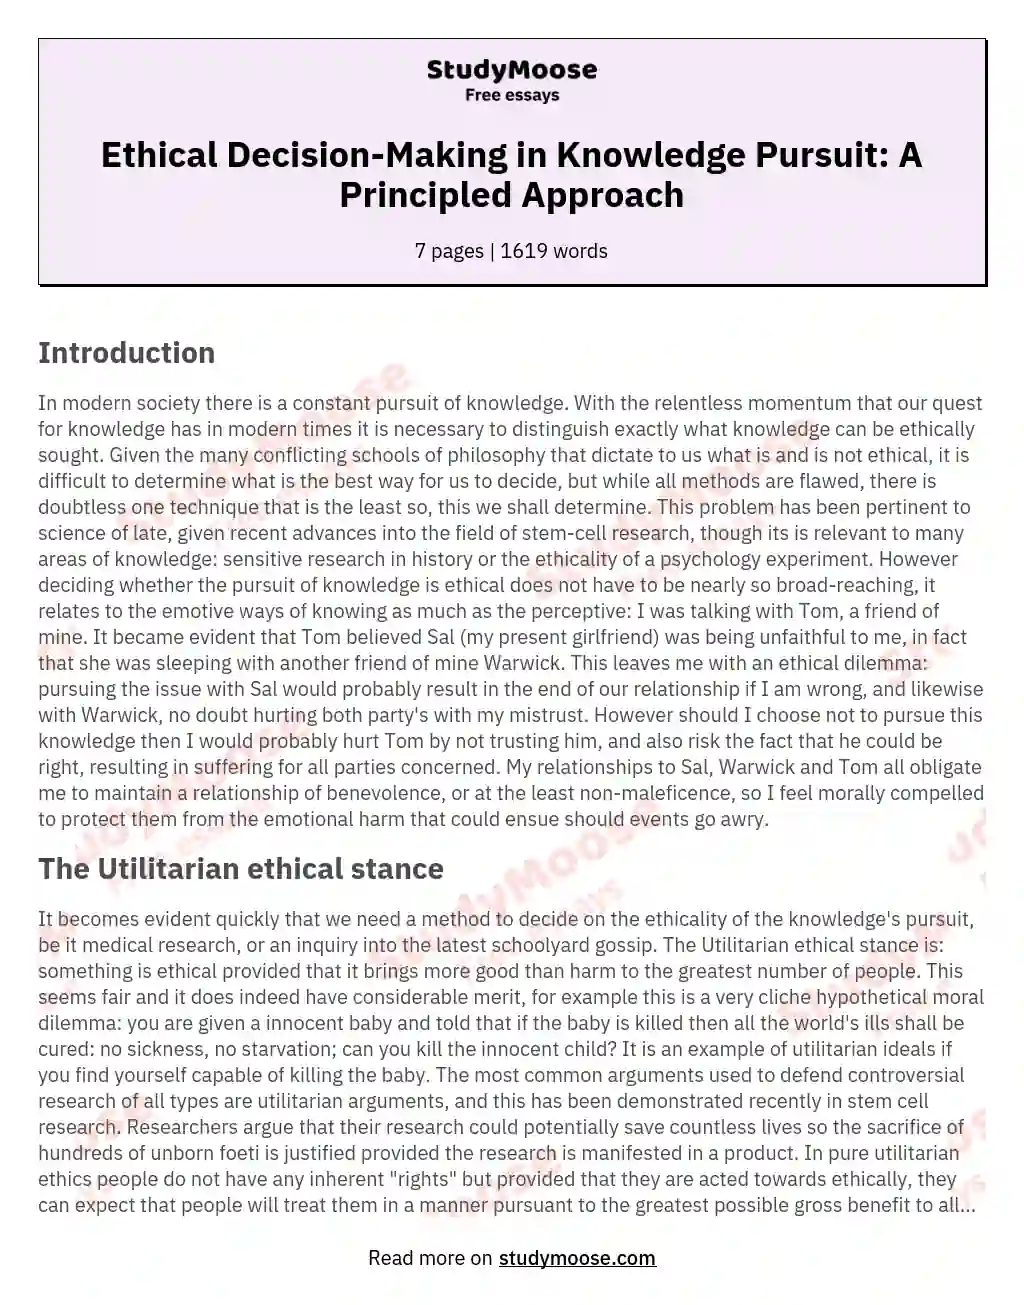 Ethical Decision-Making in Knowledge Pursuit: A Principled Approach essay